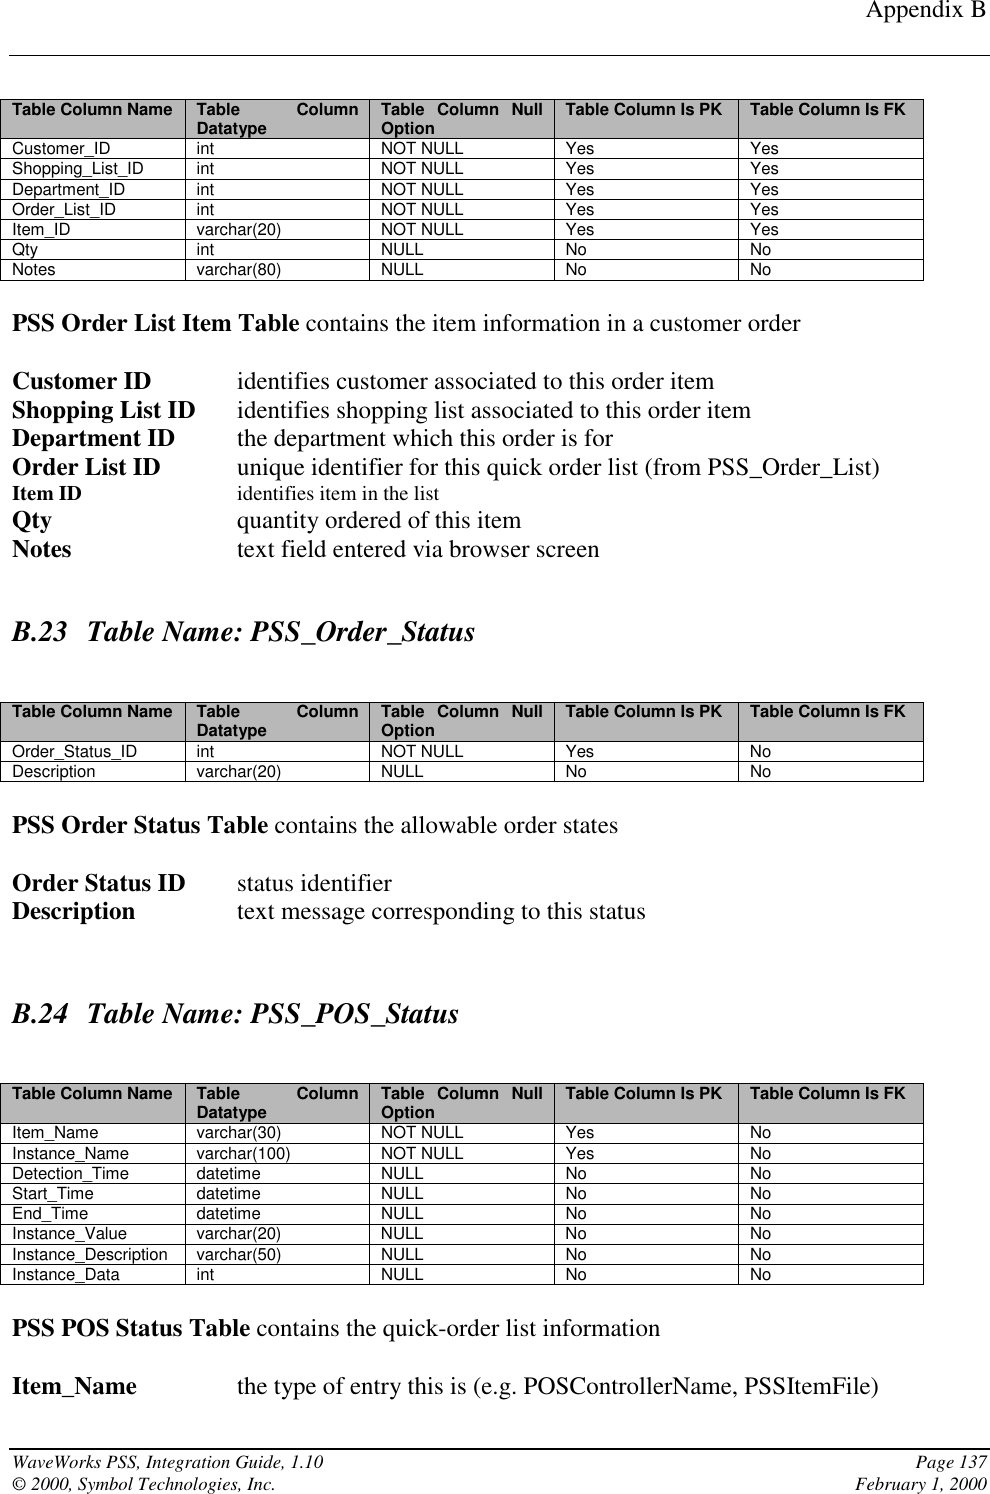 Appendix BWaveWorks PSS, Integration Guide, 1.10 Page 137© 2000, Symbol Technologies, Inc. February 1, 2000Table Column Name Table ColumnDatatype Table Column NullOption Table Column Is PK Table Column Is FKCustomer_ID int NOT NULL Yes YesShopping_List_ID int NOT NULL Yes YesDepartment_ID int NOT NULL Yes YesOrder_List_ID int NOT NULL Yes YesItem_ID varchar(20) NOT NULL Yes YesQty int NULL No NoNotes varchar(80) NULL No NoPSS Order List Item Table contains the item information in a customer orderCustomer ID identifies customer associated to this order itemShopping List ID identifies shopping list associated to this order itemDepartment ID the department which this order is forOrder List ID unique identifier for this quick order list (from PSS_Order_List)Item ID identifies item in the listQty quantity ordered of this itemNotes text field entered via browser screenB.23 Table Name: PSS_Order_StatusTable Column Name Table ColumnDatatype Table Column NullOption Table Column Is PK Table Column Is FKOrder_Status_ID int NOT NULL Yes NoDescription varchar(20) NULL No NoPSS Order Status Table contains the allowable order statesOrder Status ID status identifierDescription text message corresponding to this statusB.24 Table Name: PSS_POS_StatusTable Column Name Table ColumnDatatype Table Column NullOption Table Column Is PK Table Column Is FKItem_Name varchar(30) NOT NULL Yes NoInstance_Name varchar(100) NOT NULL Yes NoDetection_Time datetime NULL No NoStart_Time datetime NULL No NoEnd_Time datetime NULL No NoInstance_Value varchar(20) NULL No NoInstance_Description varchar(50) NULL No NoInstance_Data int NULL No NoPSS POS Status Table contains the quick-order list informationItem_Name the type of entry this is (e.g. POSControllerName, PSSItemFile)